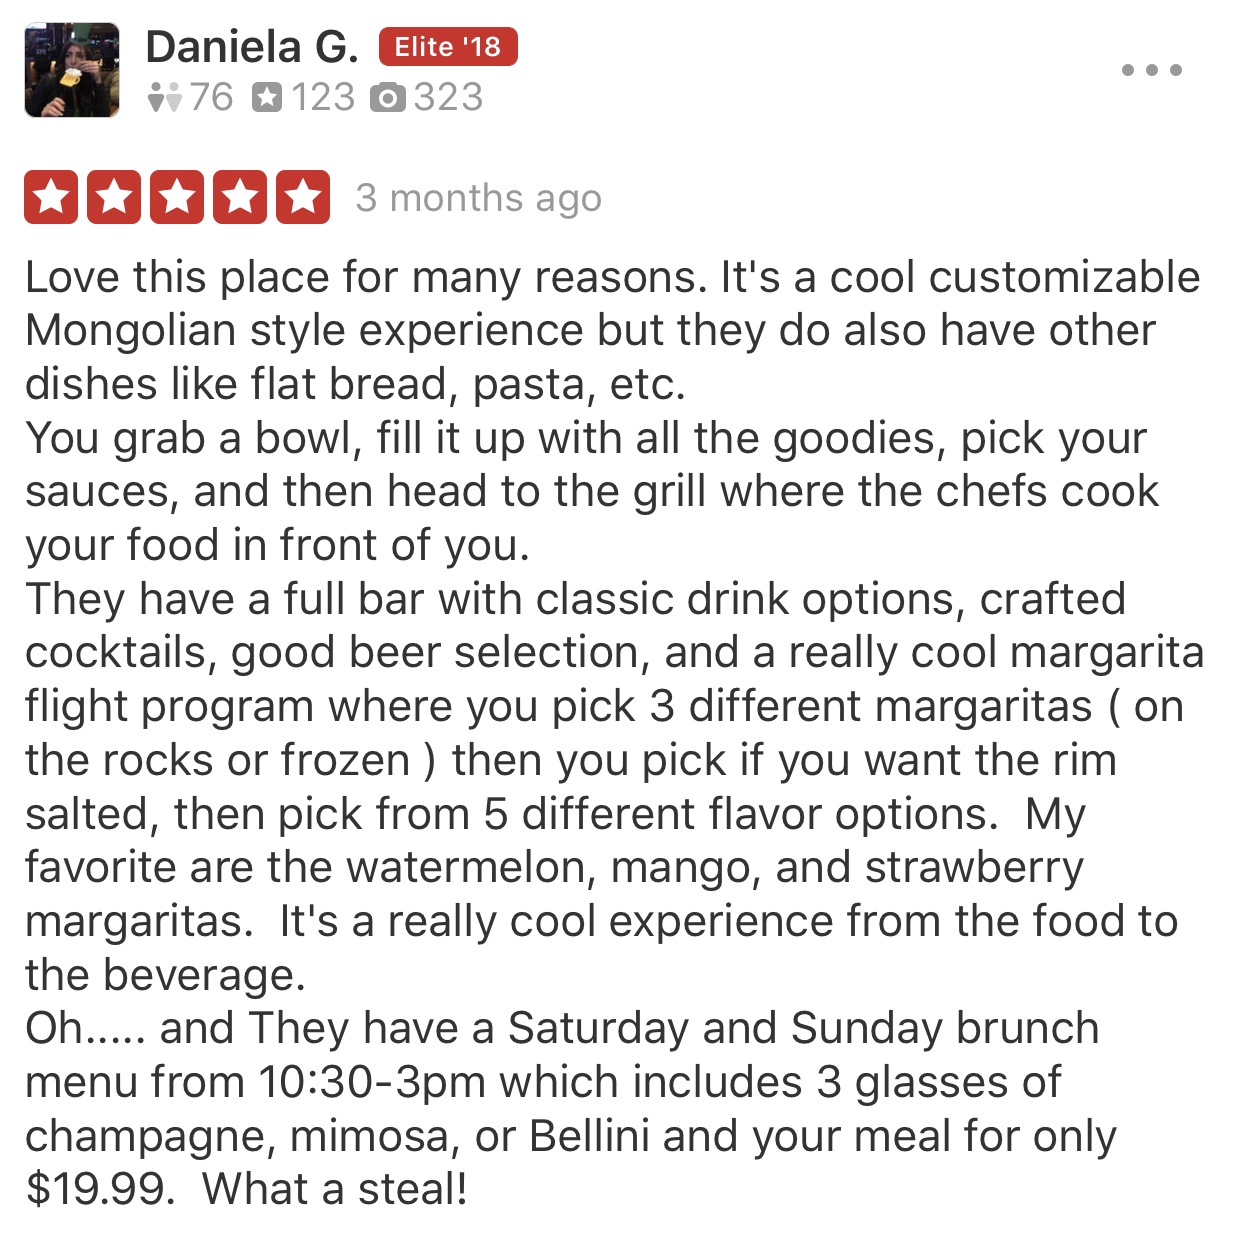 image of a 5 star yelp review - Love this place for many reasons. It's a cool customizable Mongolian style experience but they do also have other dishes like flat bread, pasta, etc. You grab a bowl, fill it up with all the goodies, pick your sauces, and then head to the grill where the chefs cook your food in front of you. They have a full bar with classic drink options, crafted cocktails, good beer selection, and a really cook margarita flight program where you pick 3 different margaritas (on the rocks or frozen) then you pick if you want the rim salted, then pick from 5 different flavor options. My favorite are the watermelon, mango, and strawberry margaritas. It's a really cool experience from the food to the beverage. Oh... and they have a Saturday and Sunday brunch menu.